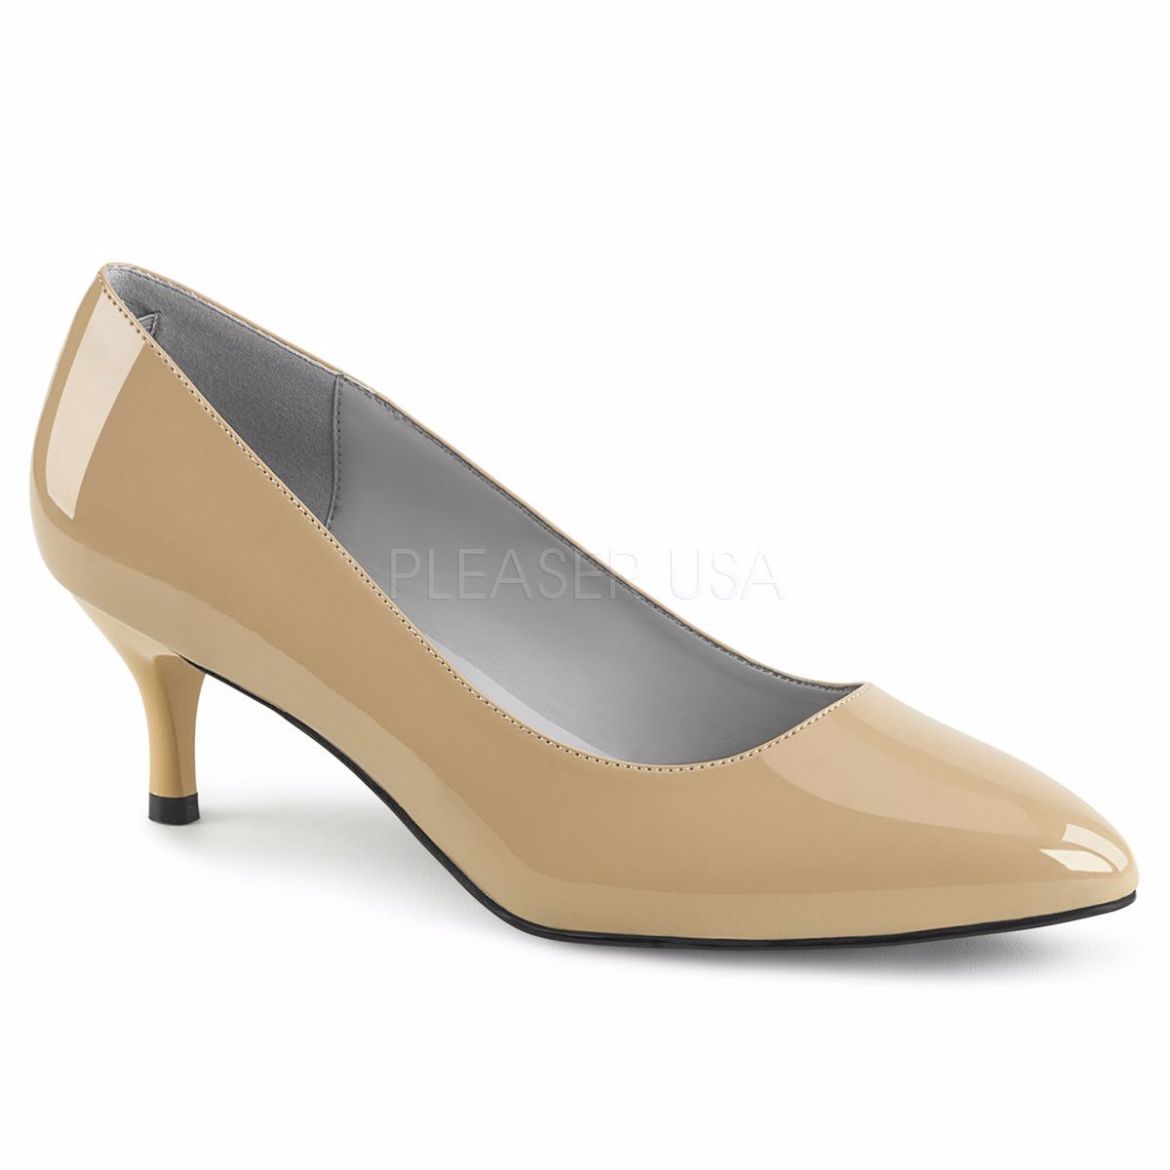 Product image of Pleaser Pink Label Kitten-01 Cream Patent, 2 1/2 inch (6.4 cm) Heel Court Pump Shoes